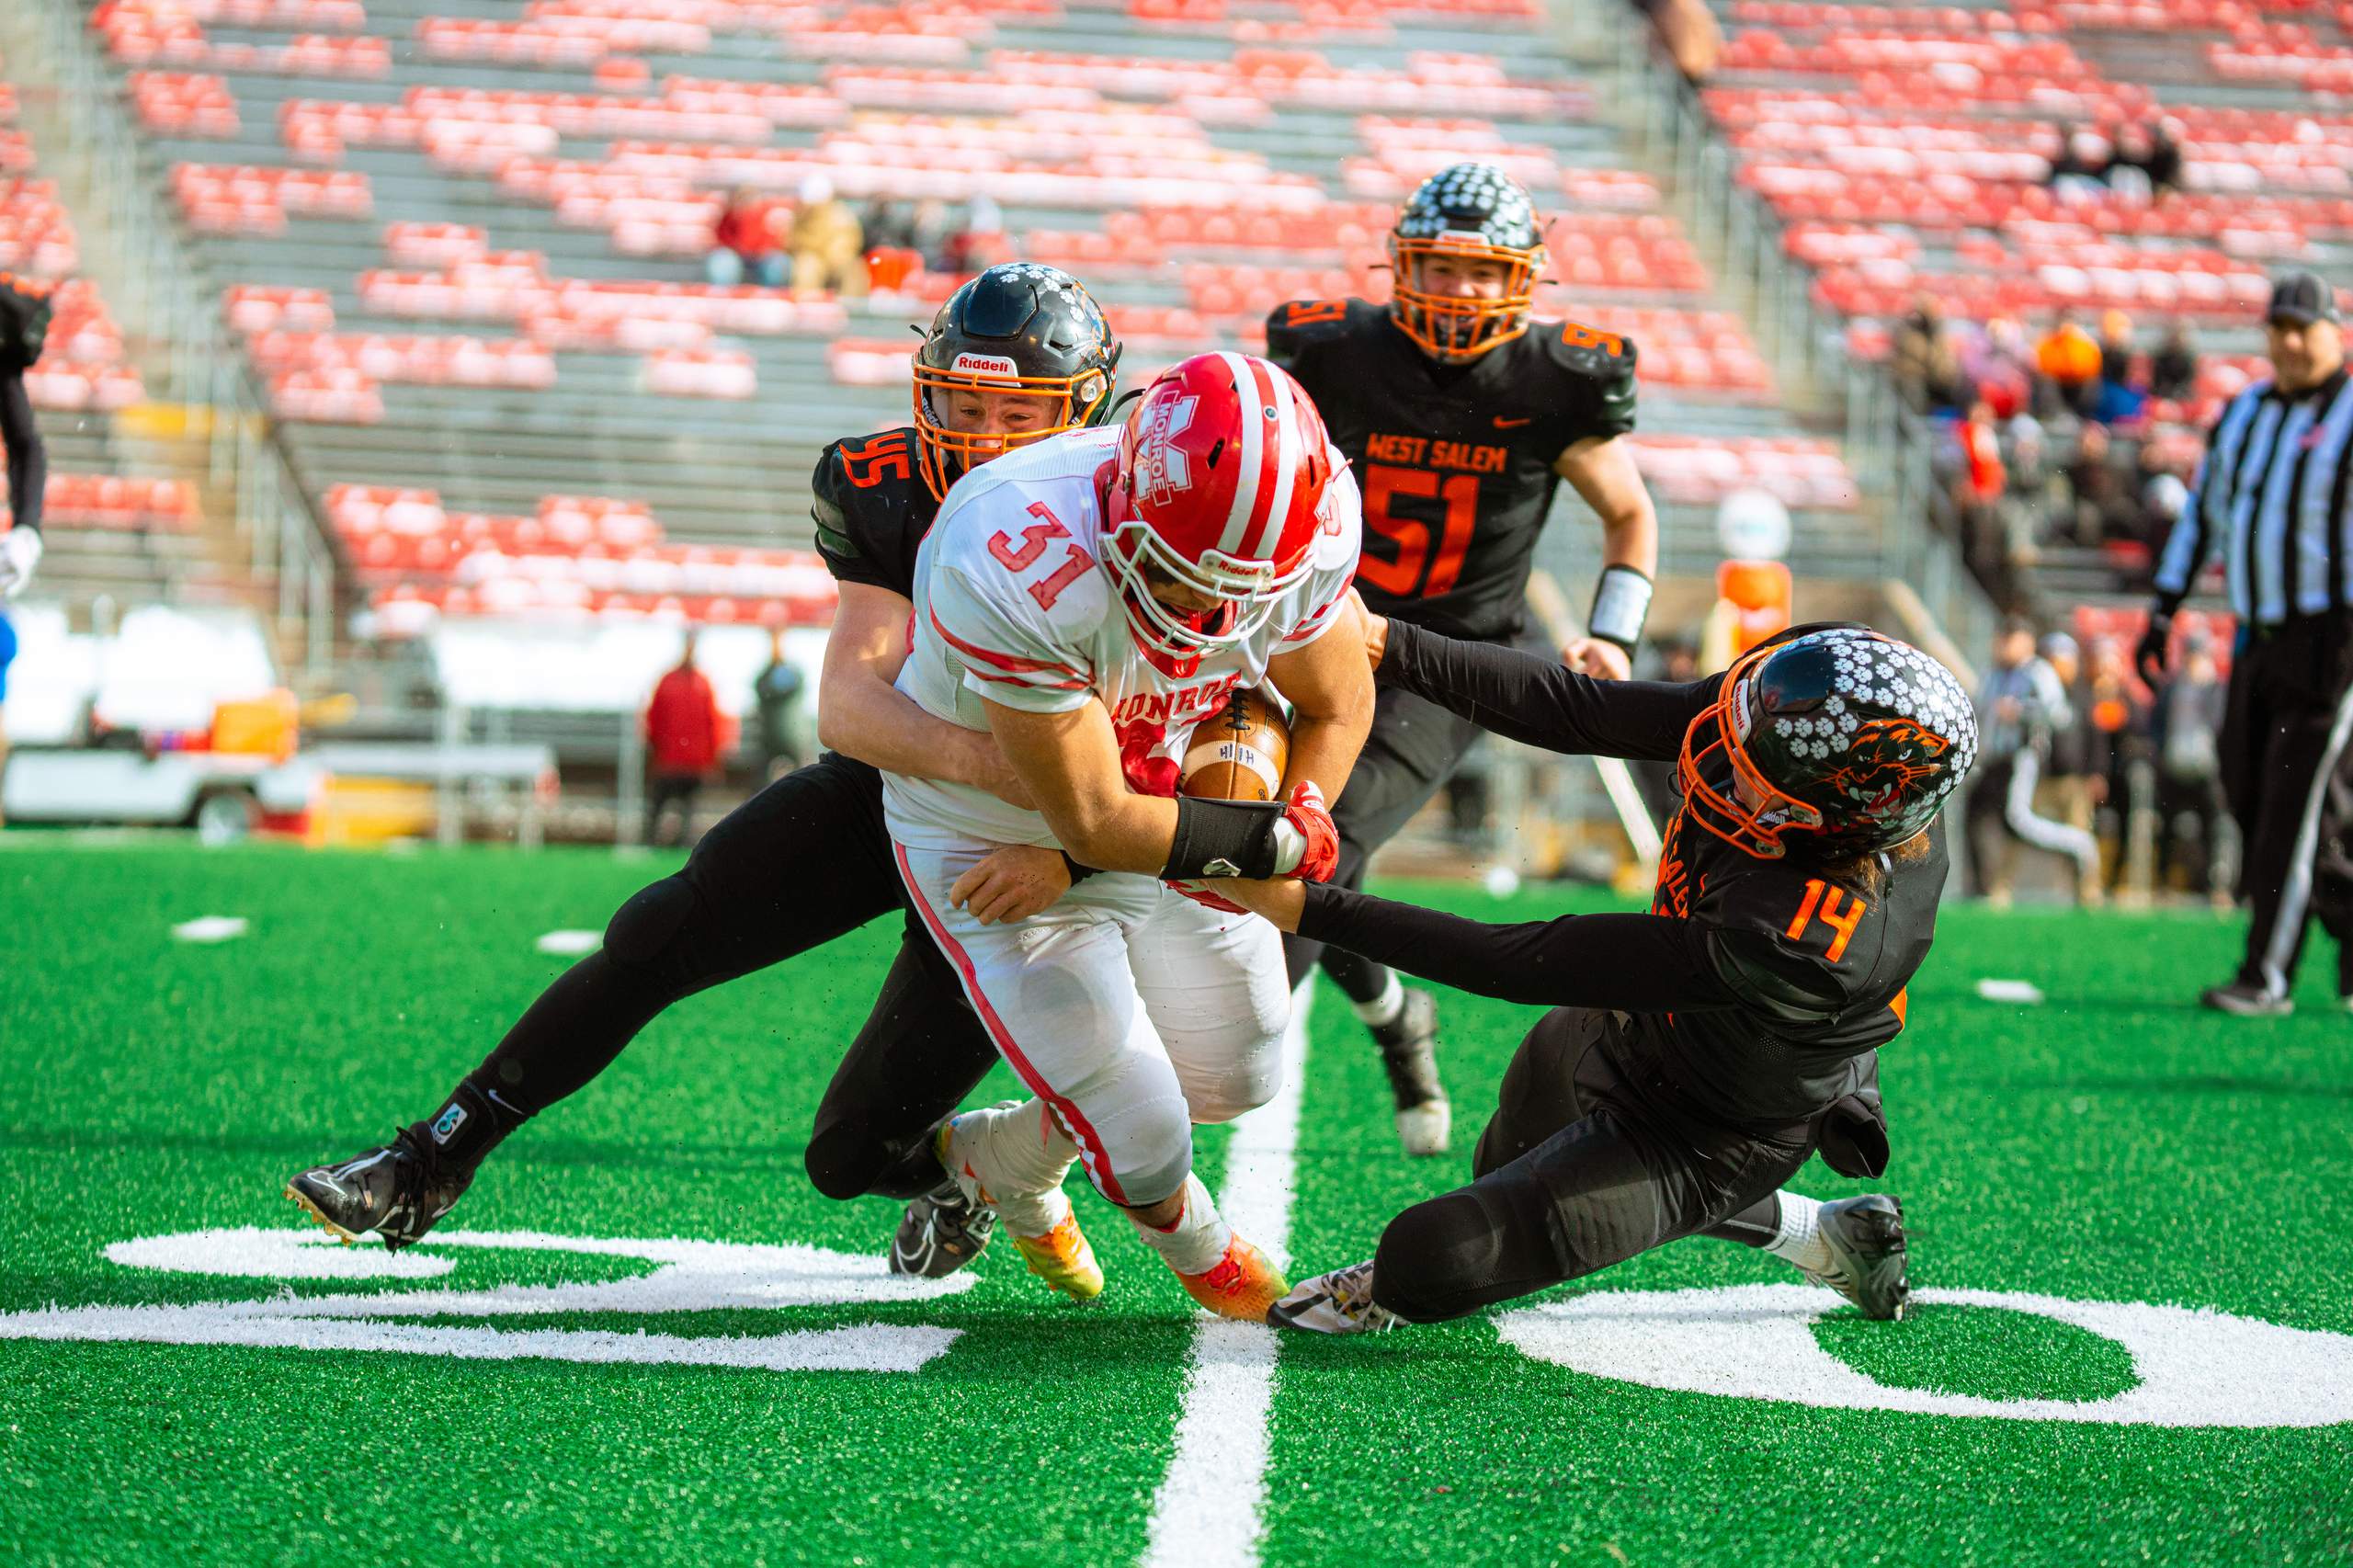 Monroe vs. West Salem, 2022 WIAA Division 3 Championship Game, photography by Ross Harried for Second Crop Sports